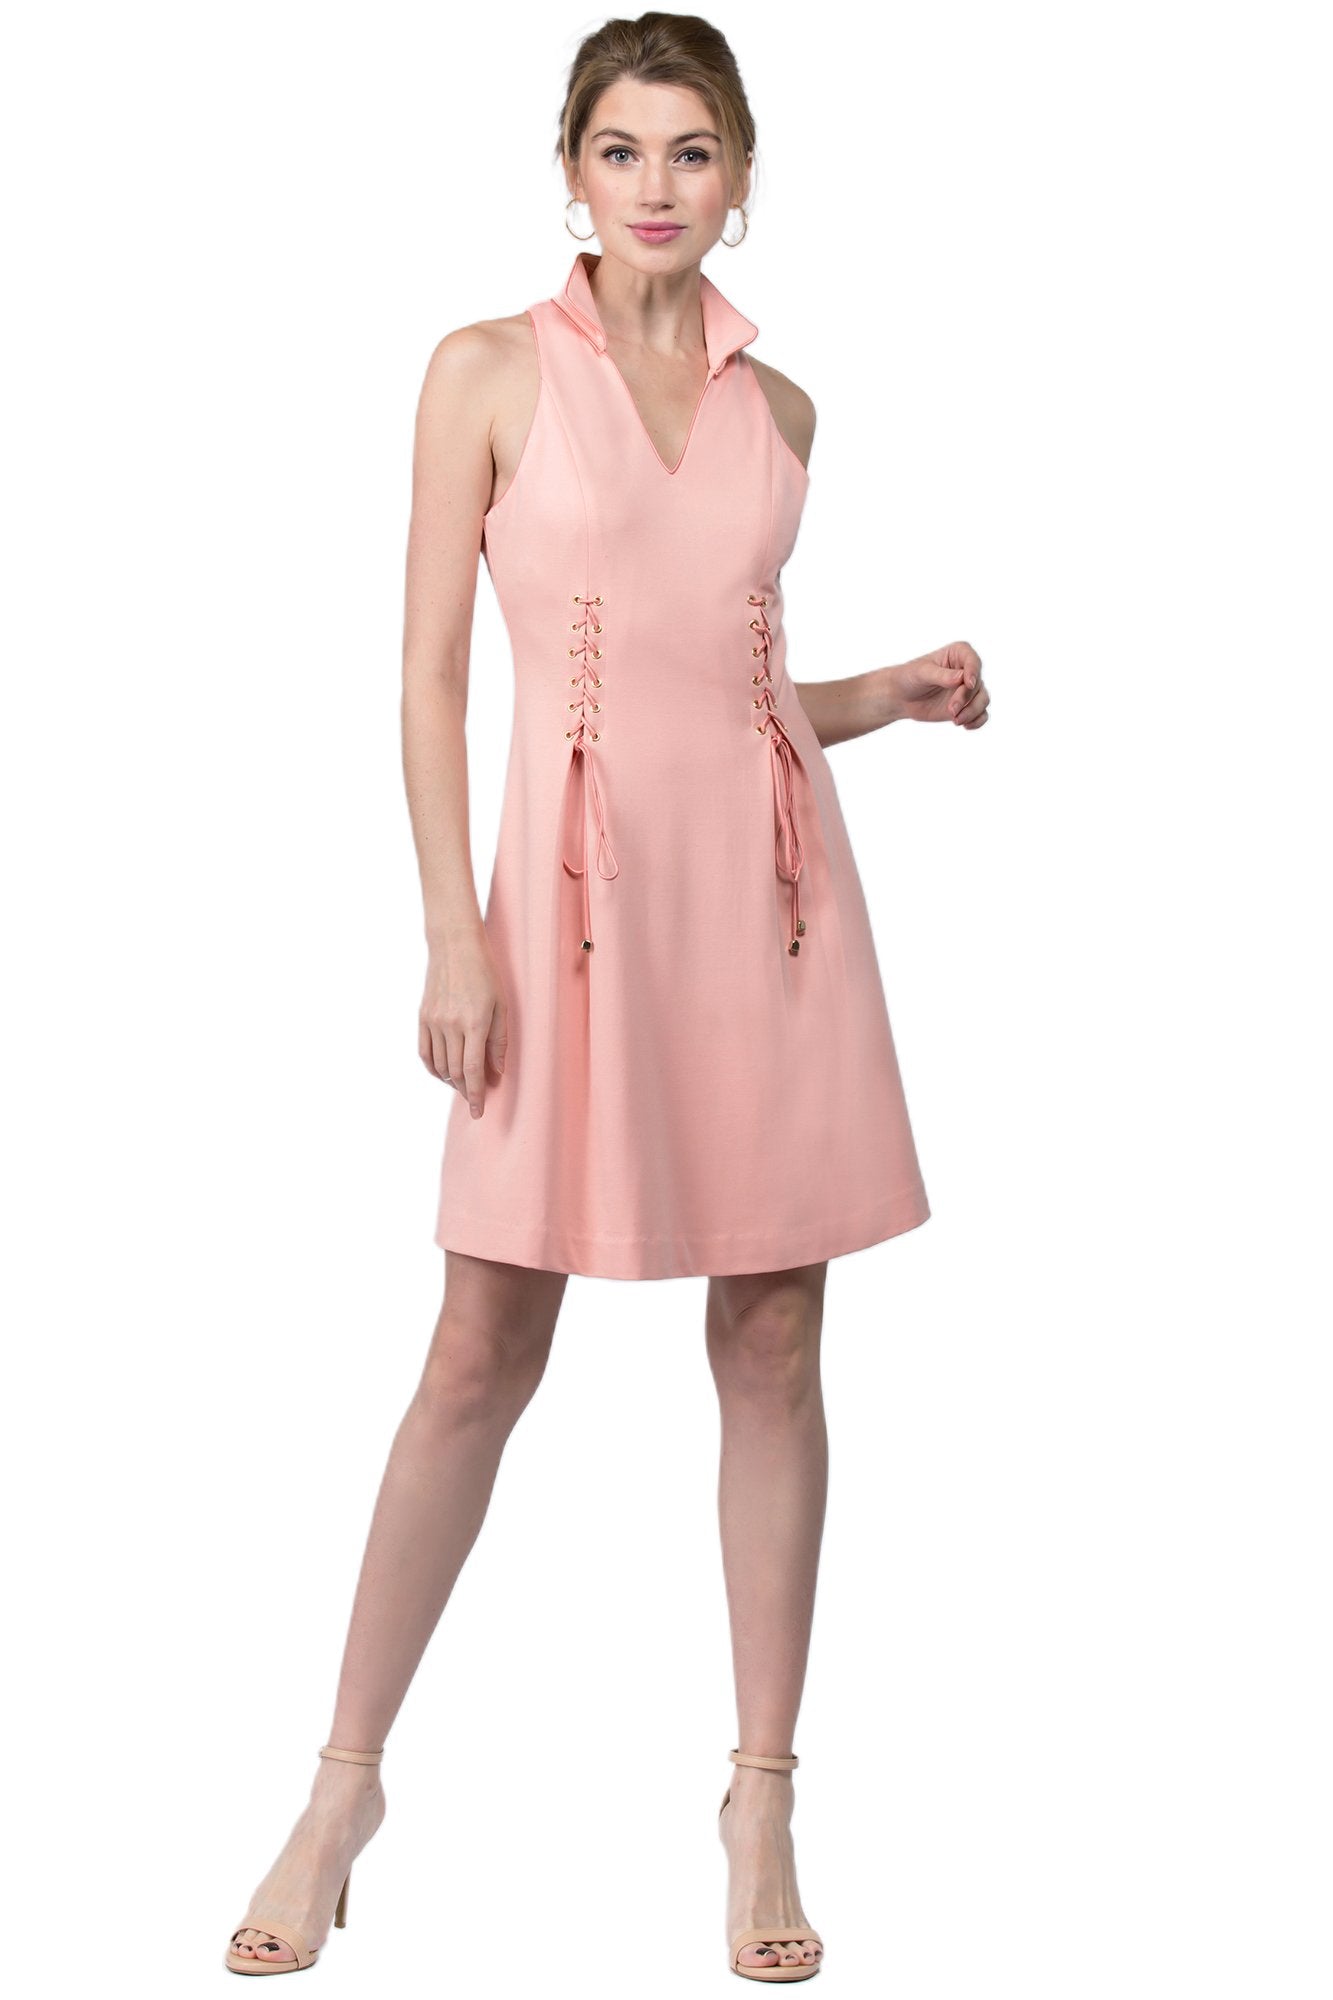 Model wearing sleeveless racer neck peachy pink short fit and flare wing tip collar dress with corset lace up ties at front waist.